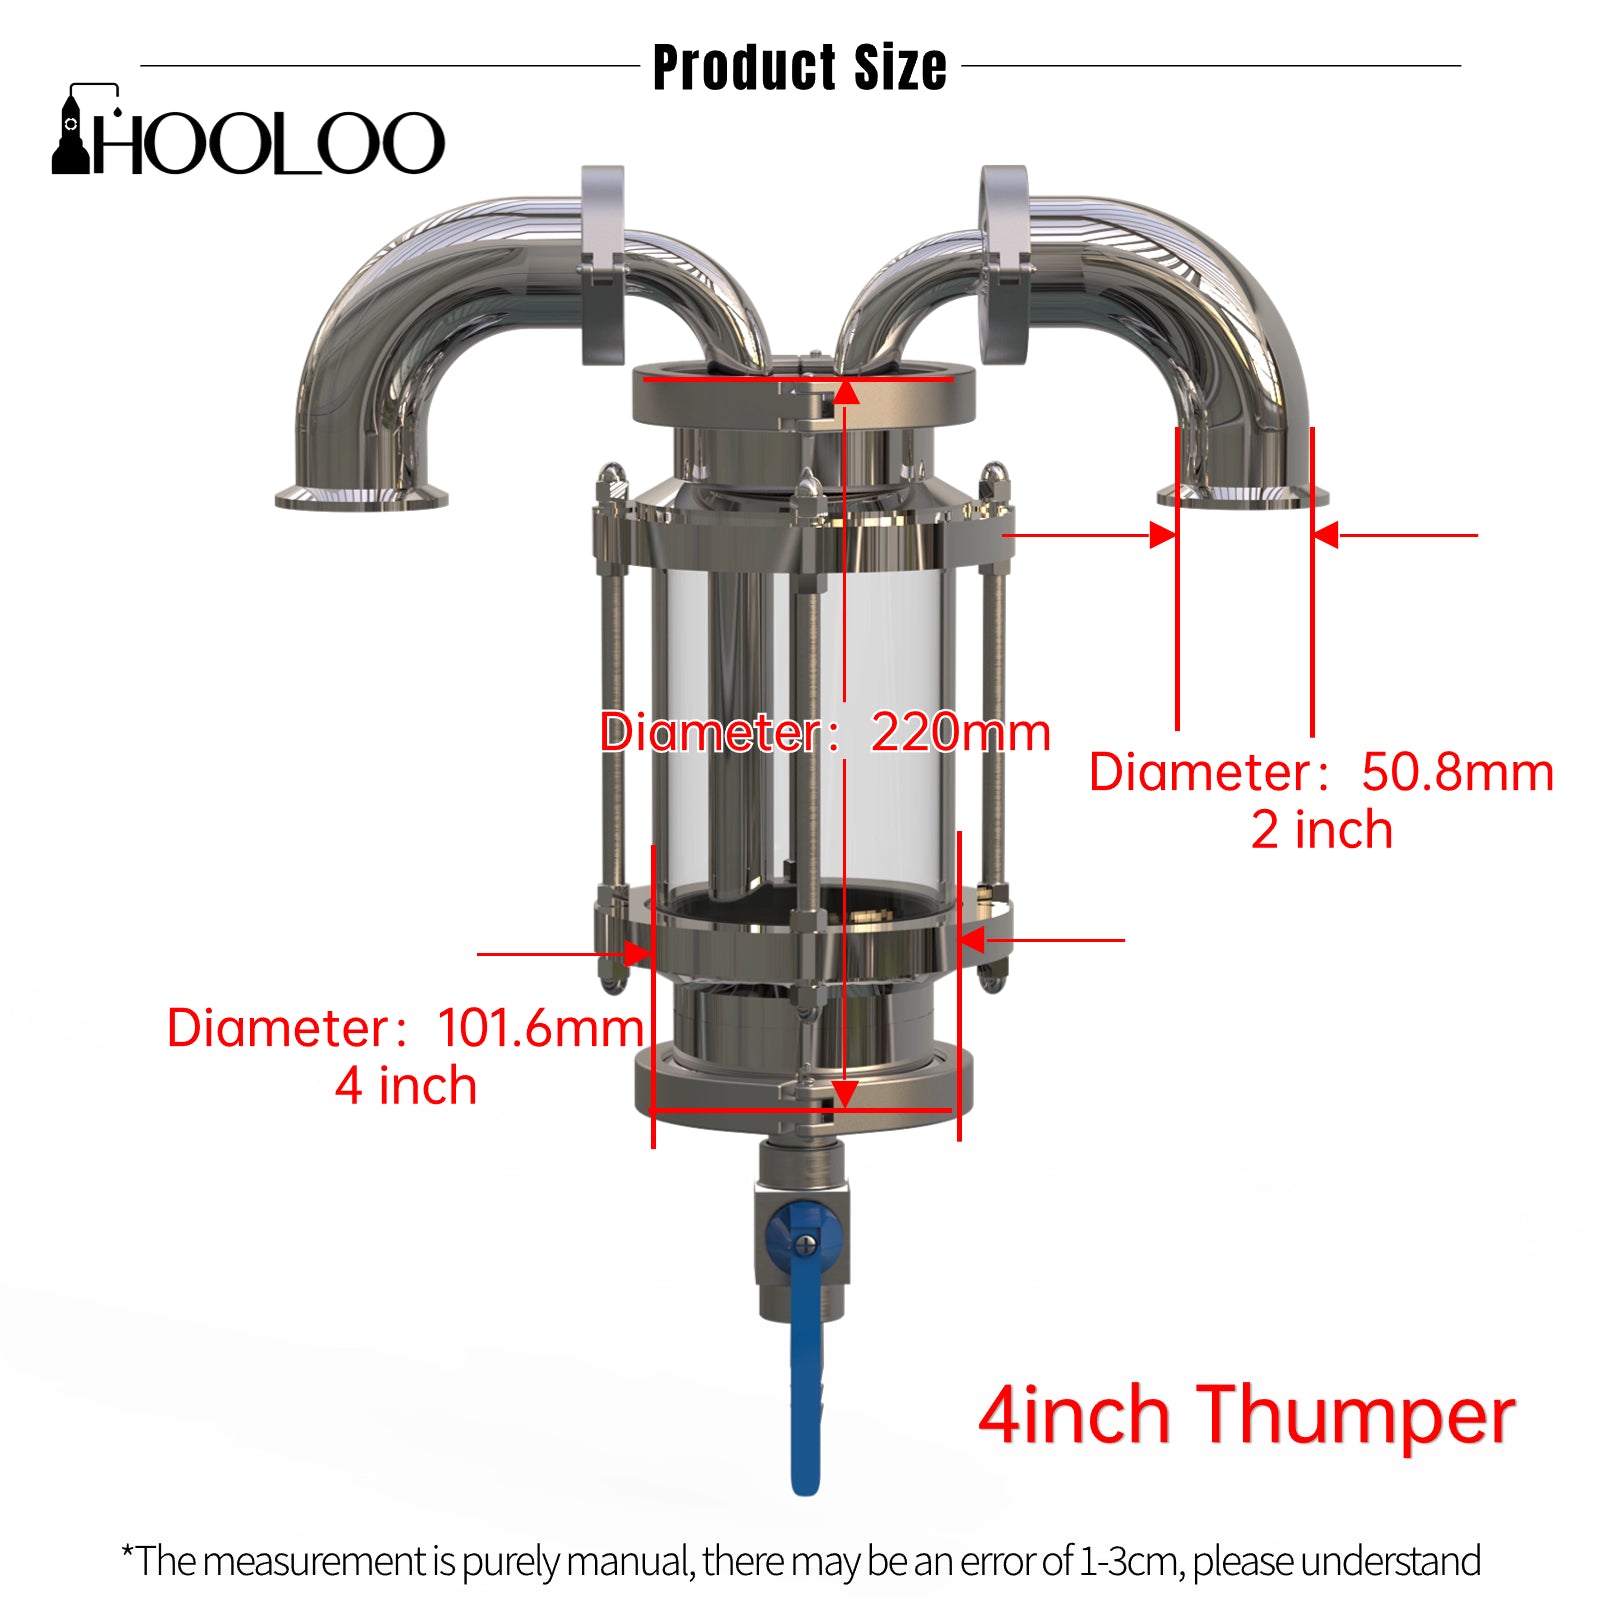 Thumper(Special accessories for producing Rum) - Hooloo Distilling Equipment Supply